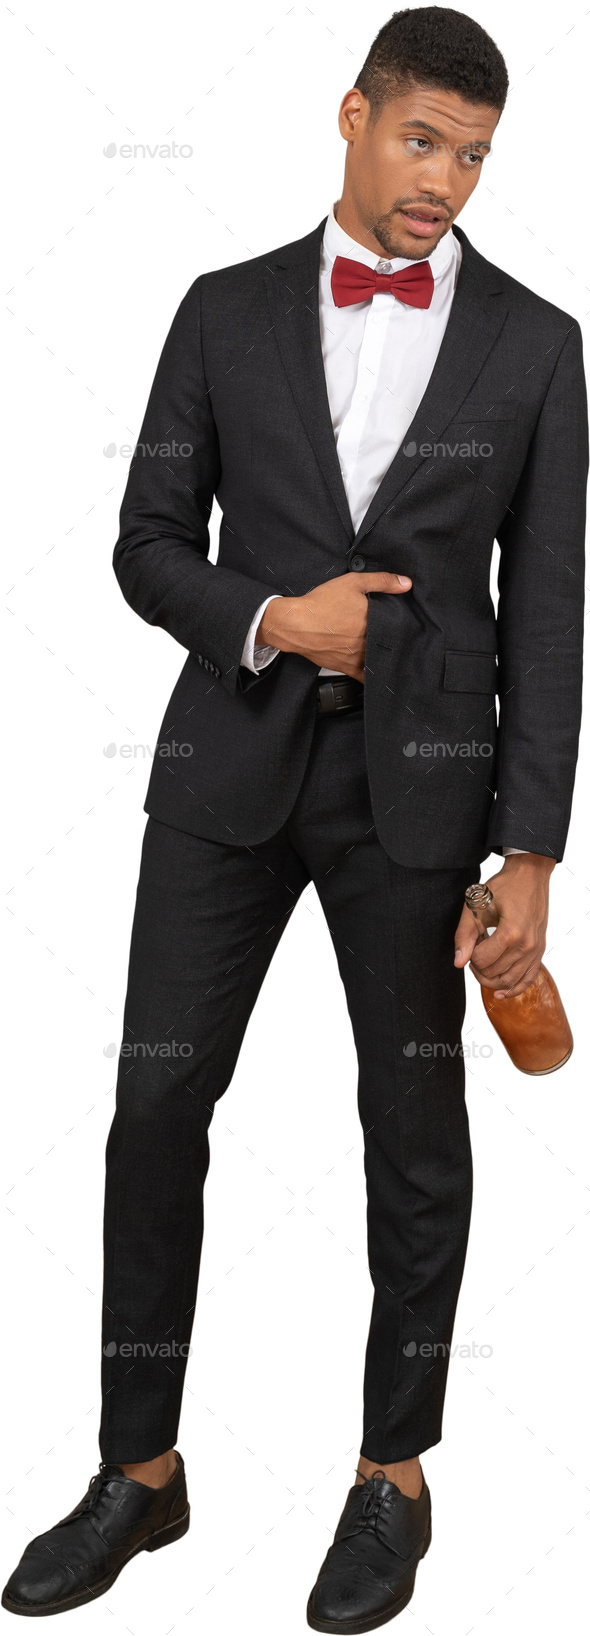 A Man In A Black Suit And Red Bow Tie Stock Photo By Icons8 | Photodune